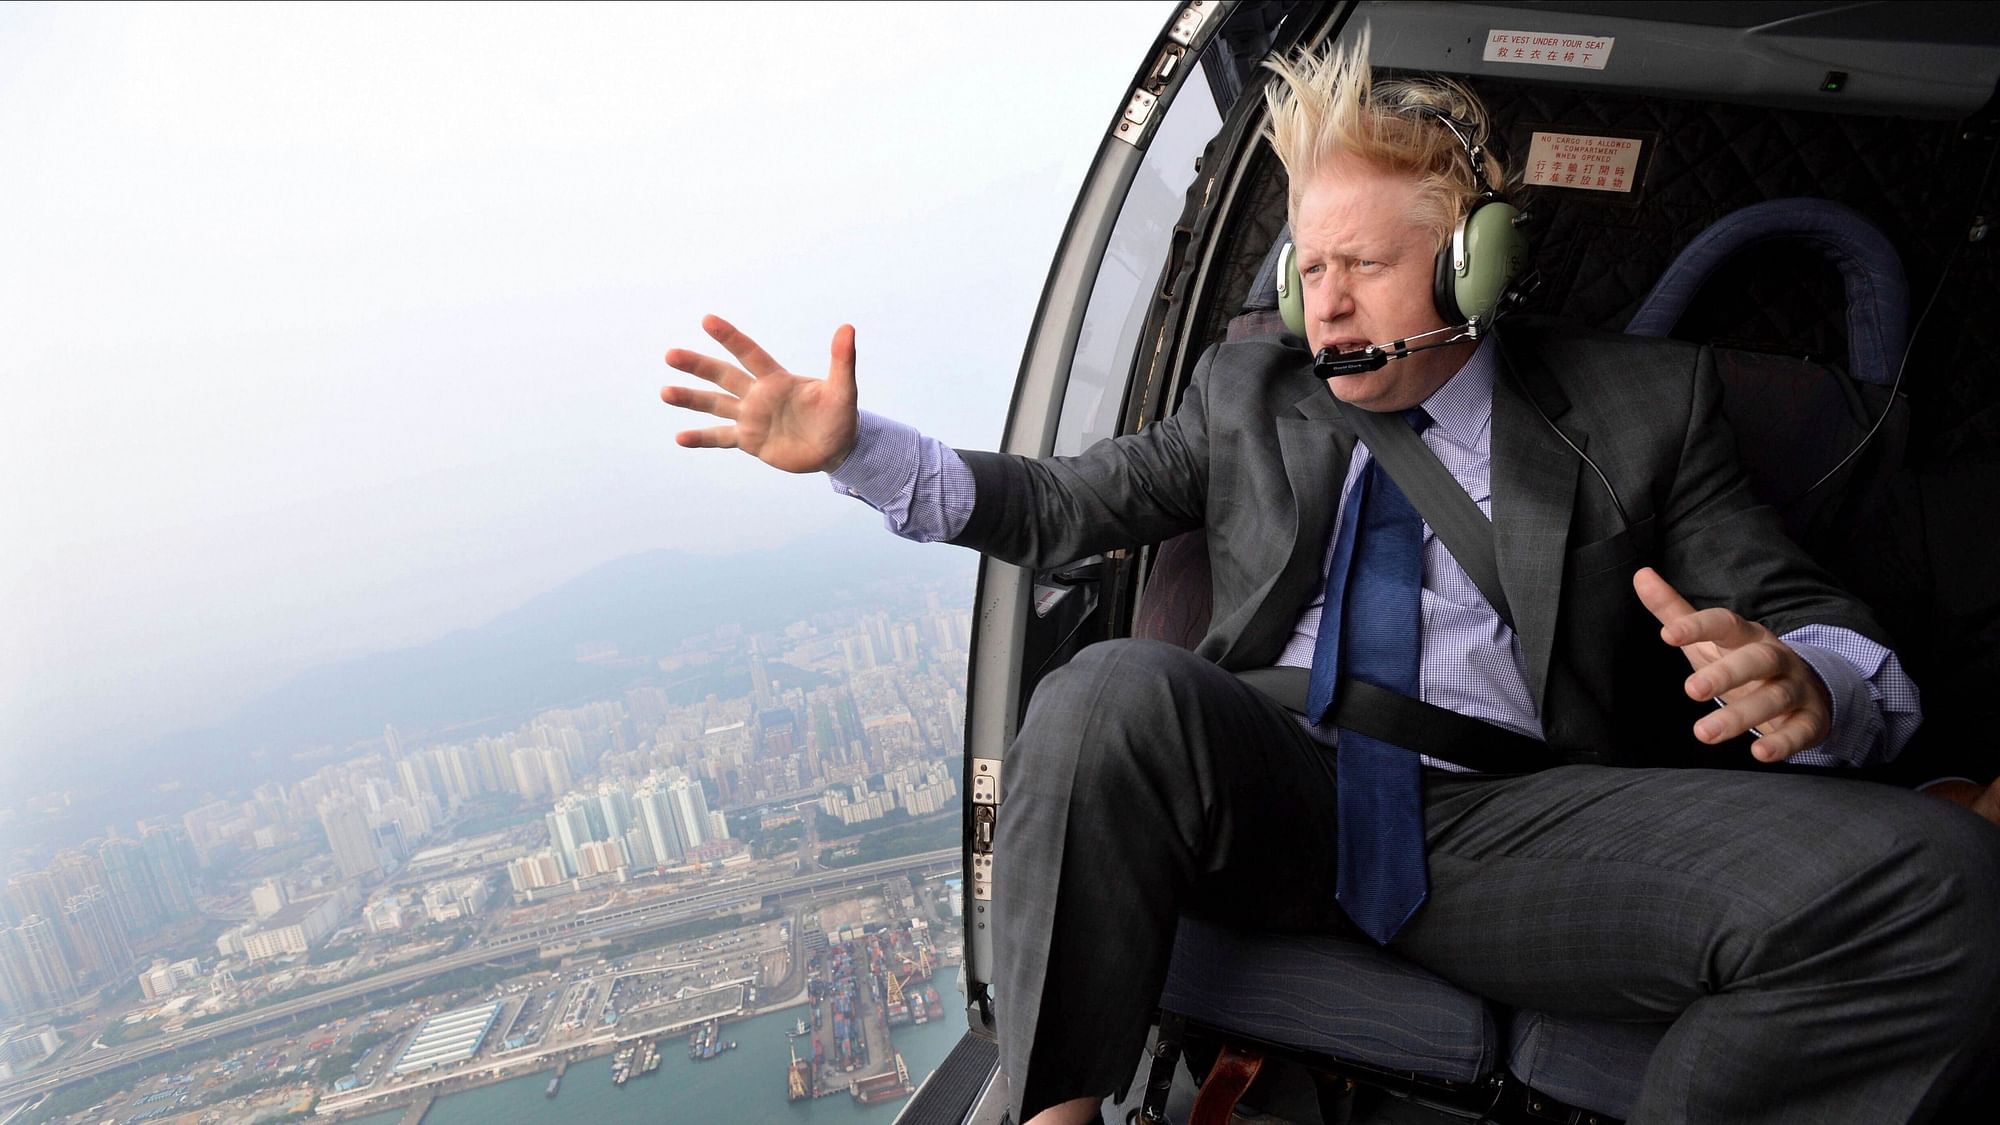 In this 2013 file photo, the then Mayor of London Boris Johnson looks at the skyline during a helicopter ride over Hong Kong.